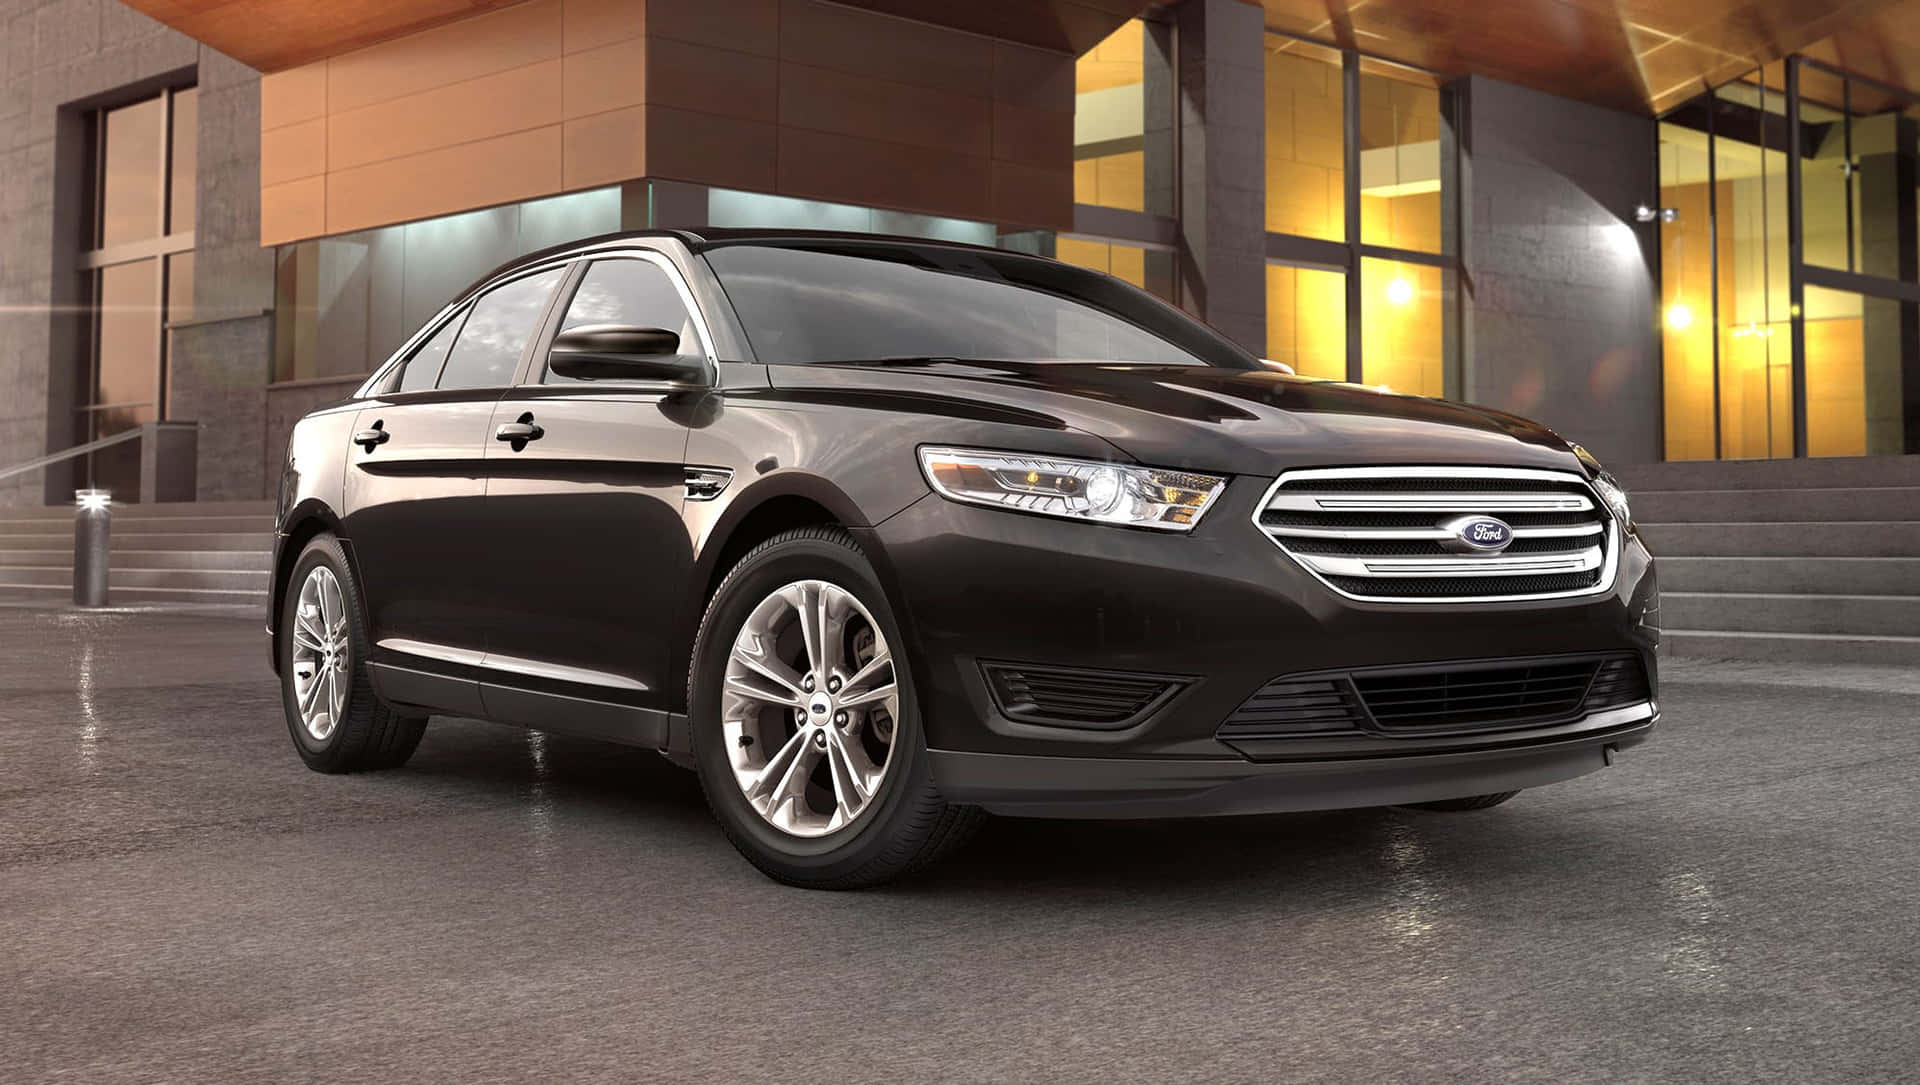 The Black 2019 Ford Taurus Is Parked In Front Of A Building